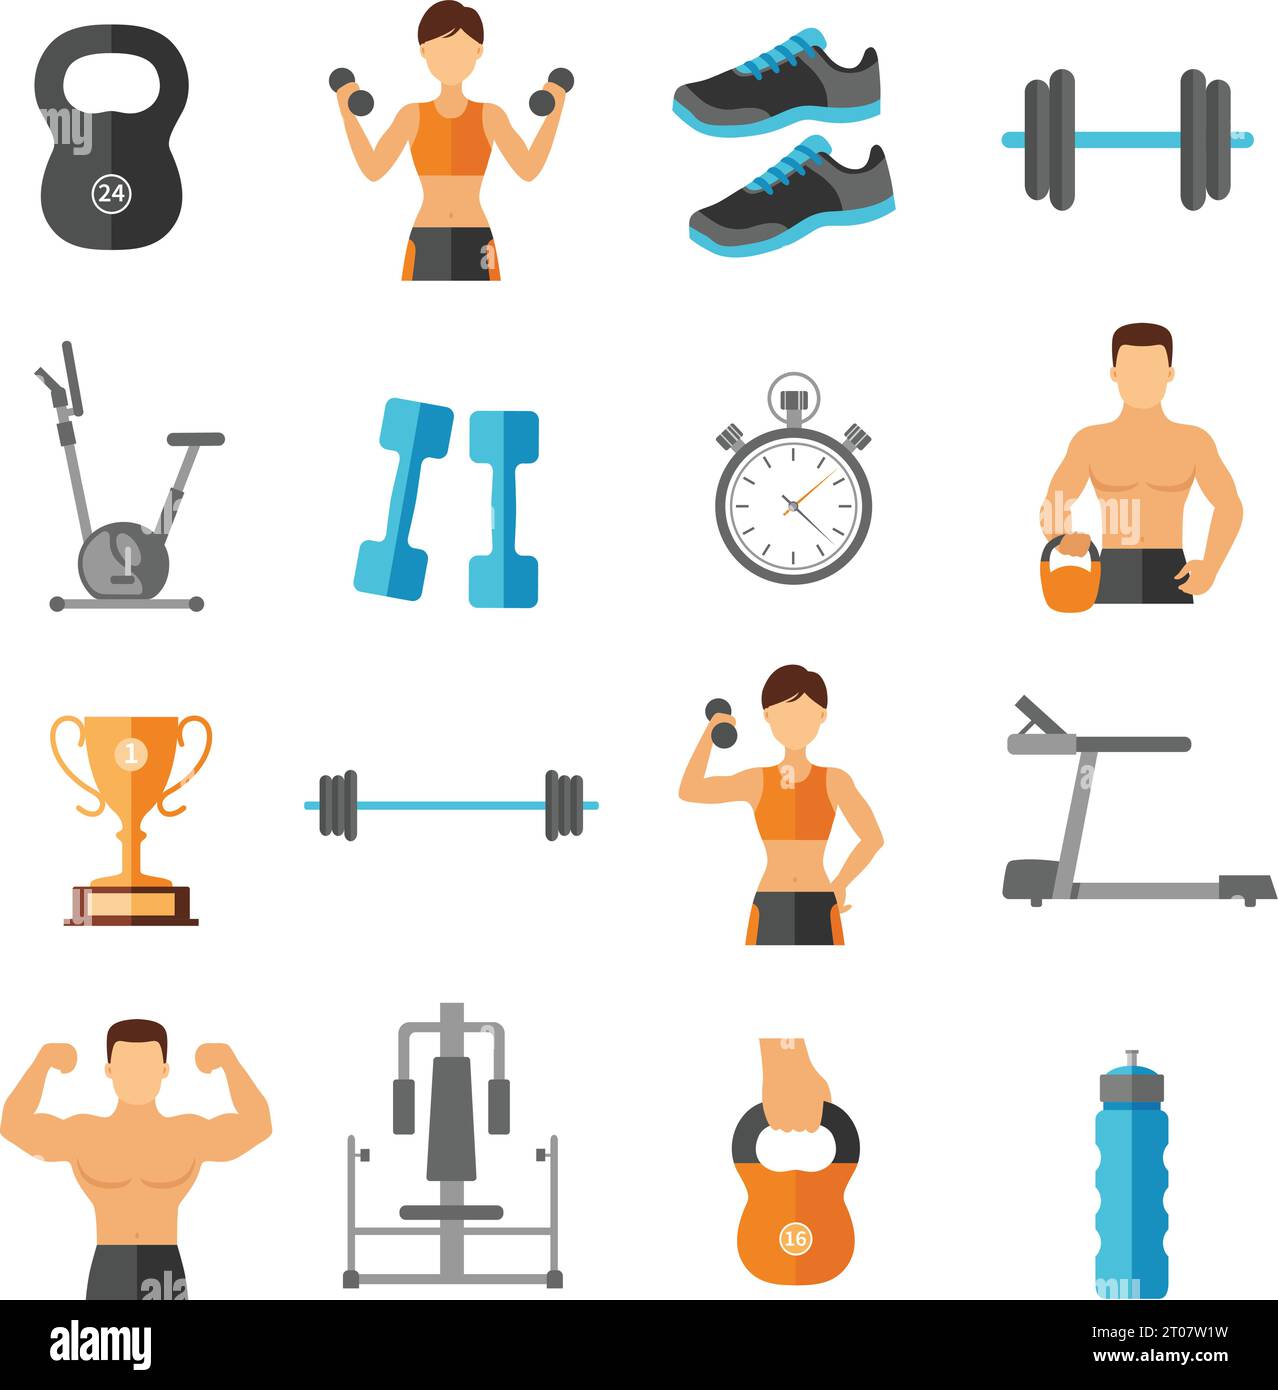 Fitness flat style icons set with sportsmen athletes equipment and gear isolated vector illustration Stock Vector